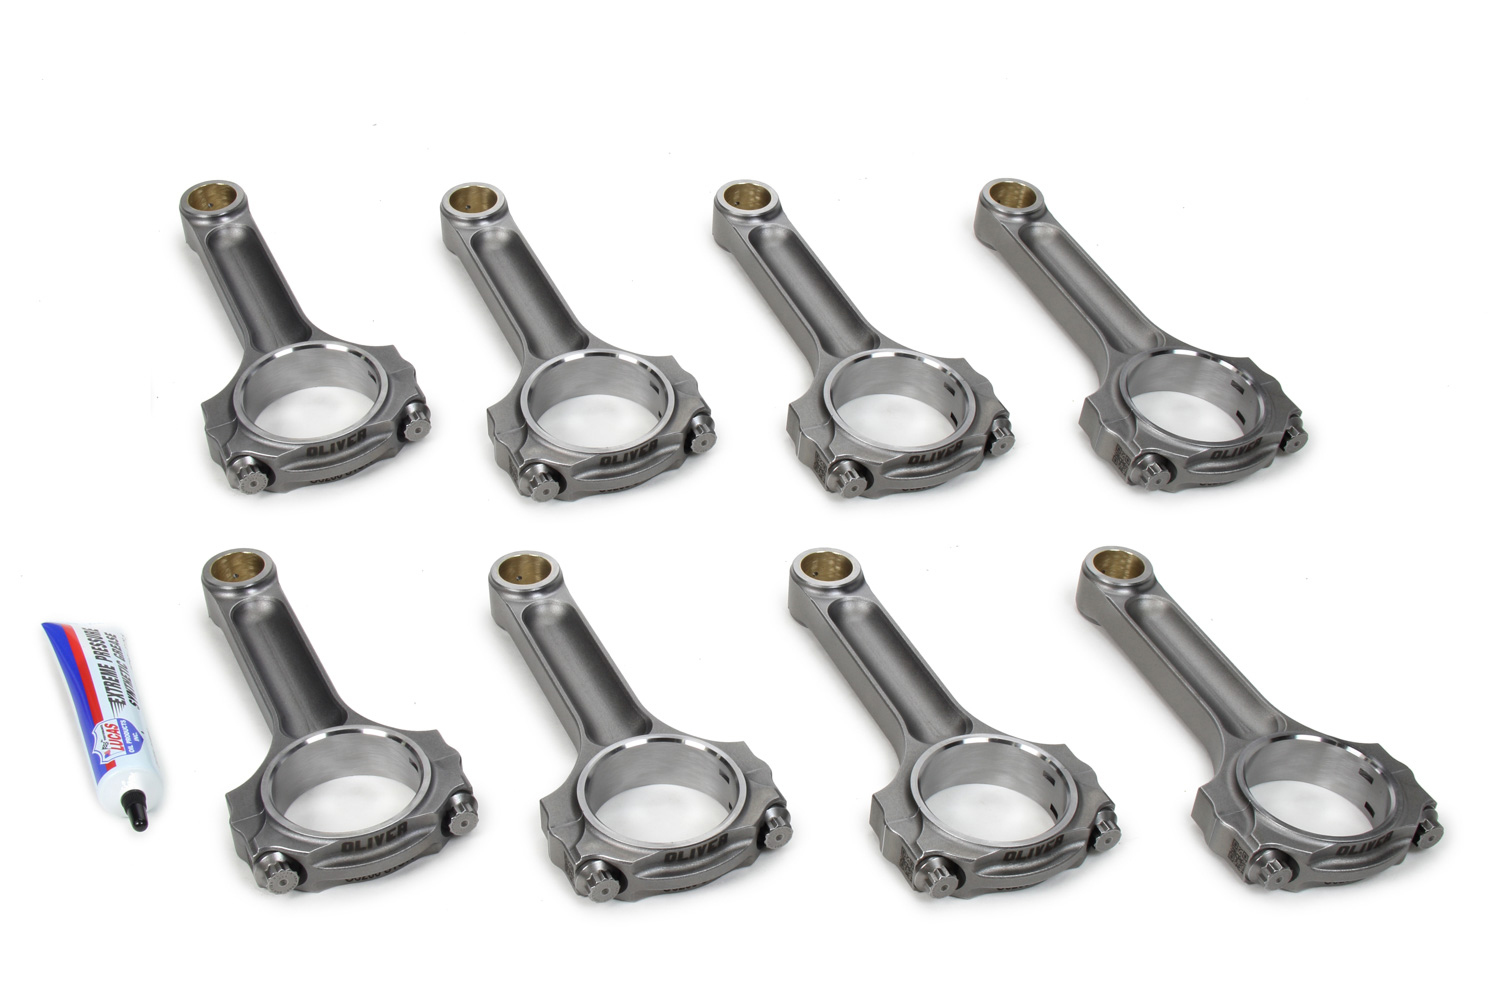 Oliver Rods C6000STLT8 - Connecting Rod, Standard Light, I Beam, 6.000 in Long, Bushed, 7/16 in Cap Screws, Forged Steel, Small Block Chevy, Set of 8